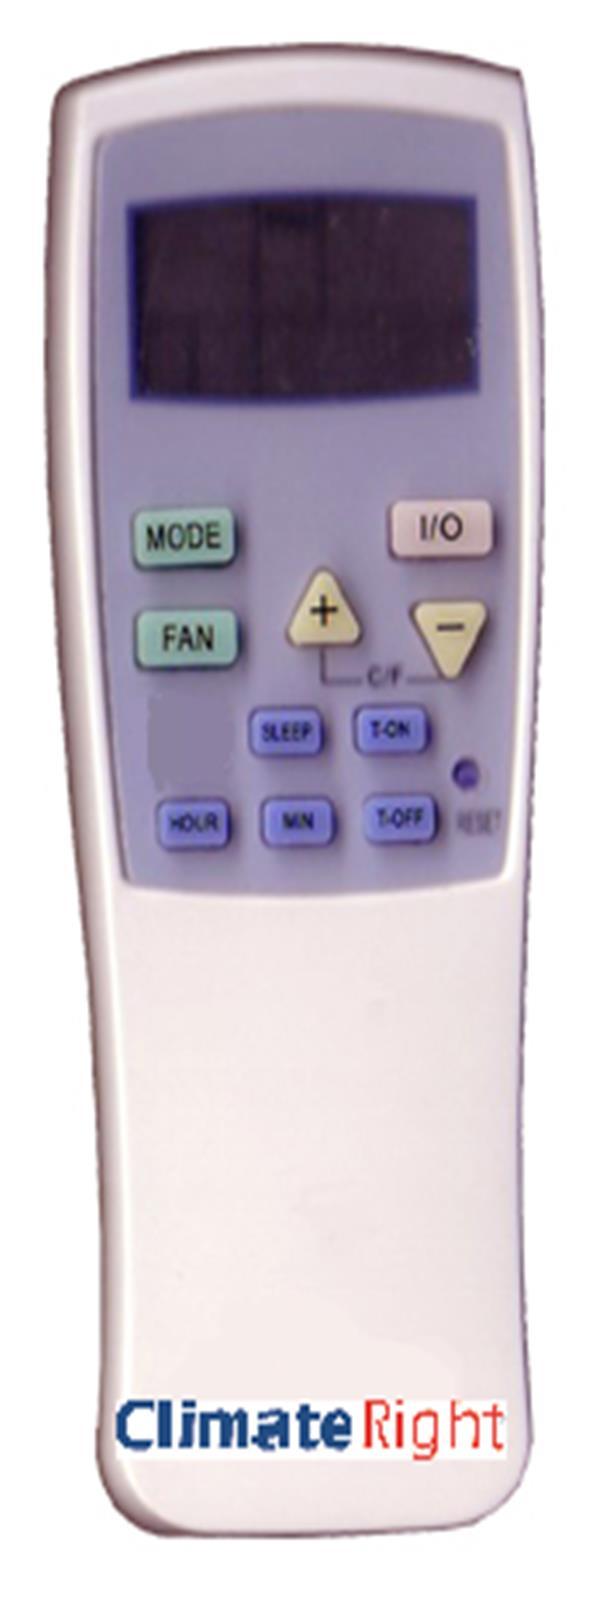 REMOTE CONTROL 5-3 5-4 RESET BUTTON HOUR/MIN Use the Hour and Min buttons to set the clock and timer.